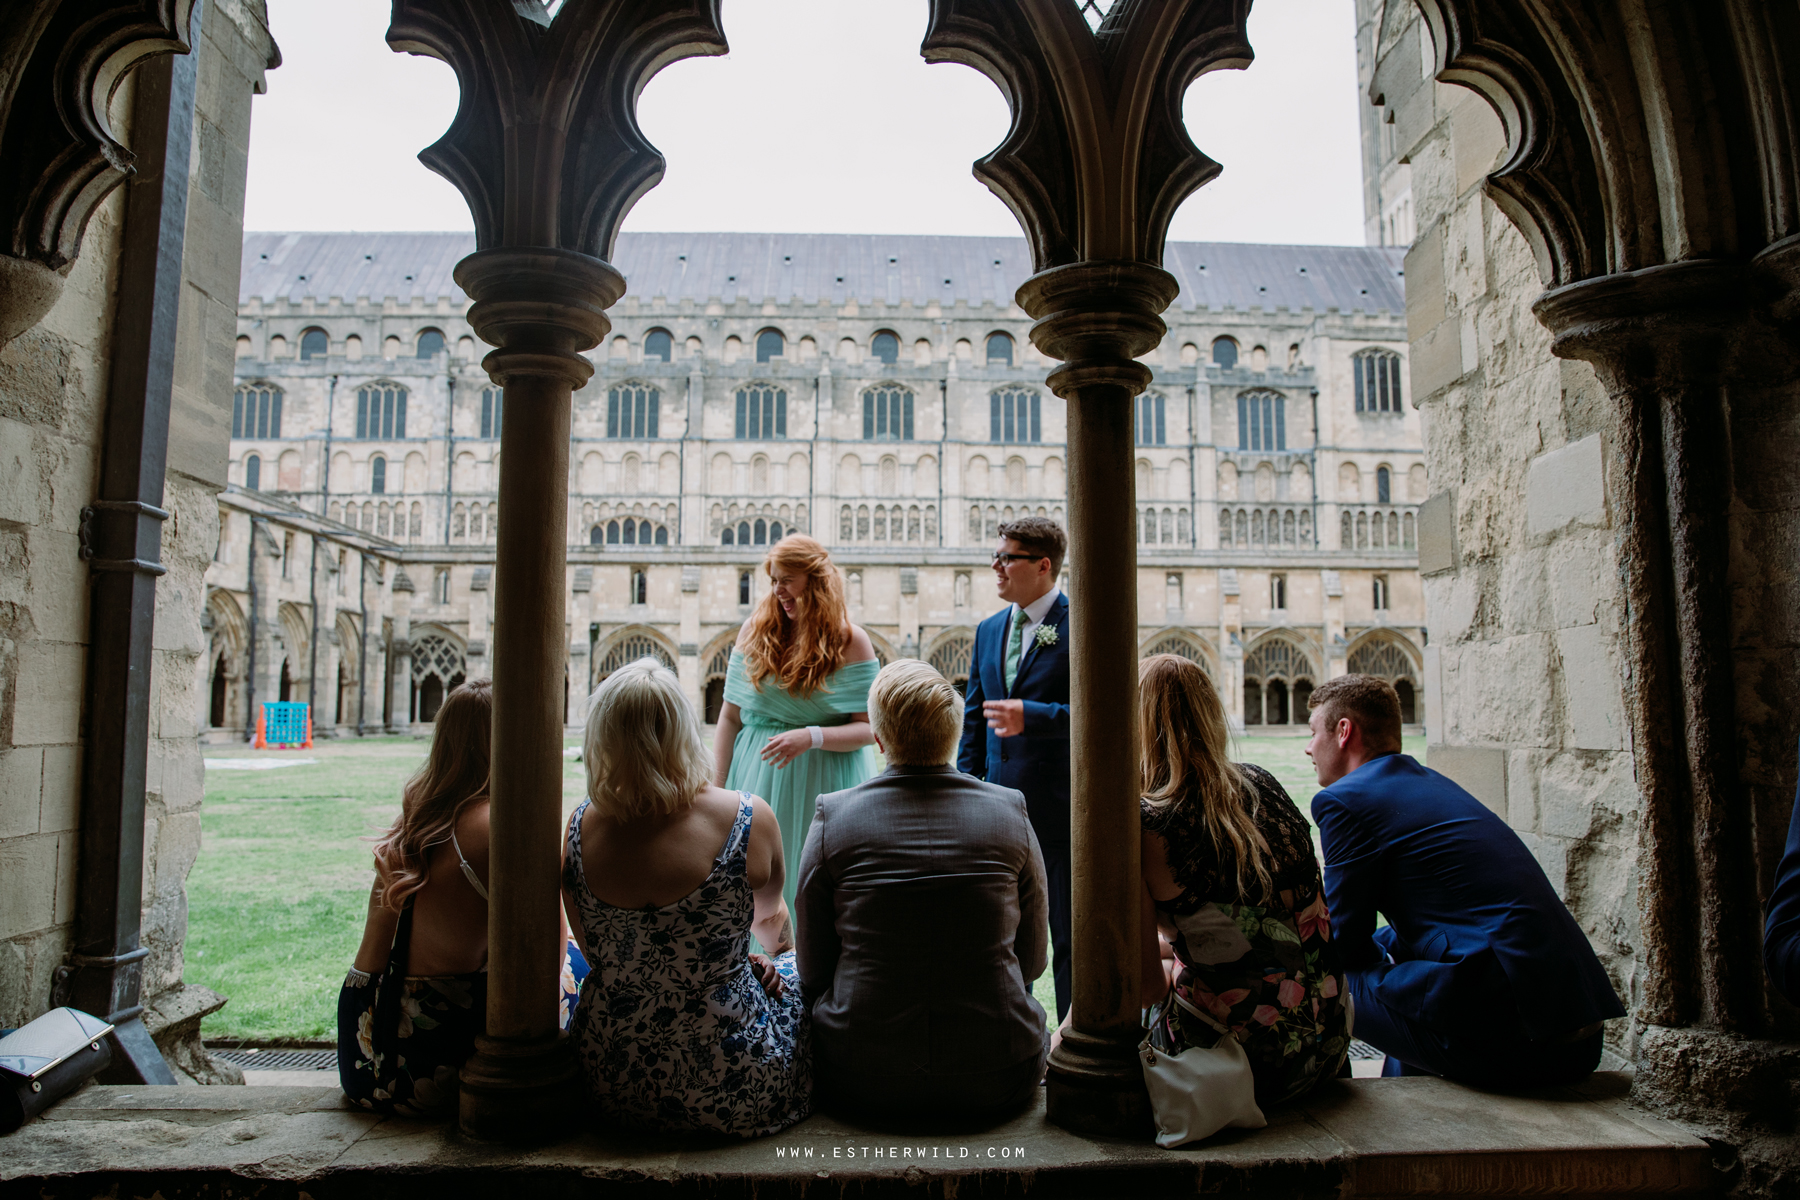 Norwich_Castle_Arcade_Grosvenor_Chip_Birdcage_Cathedral_Cloisters_Refectory_Wedding_Photography_Esther_Wild_Photographer_Norfolk_Kings_Lynn_3R8A2122.jpg